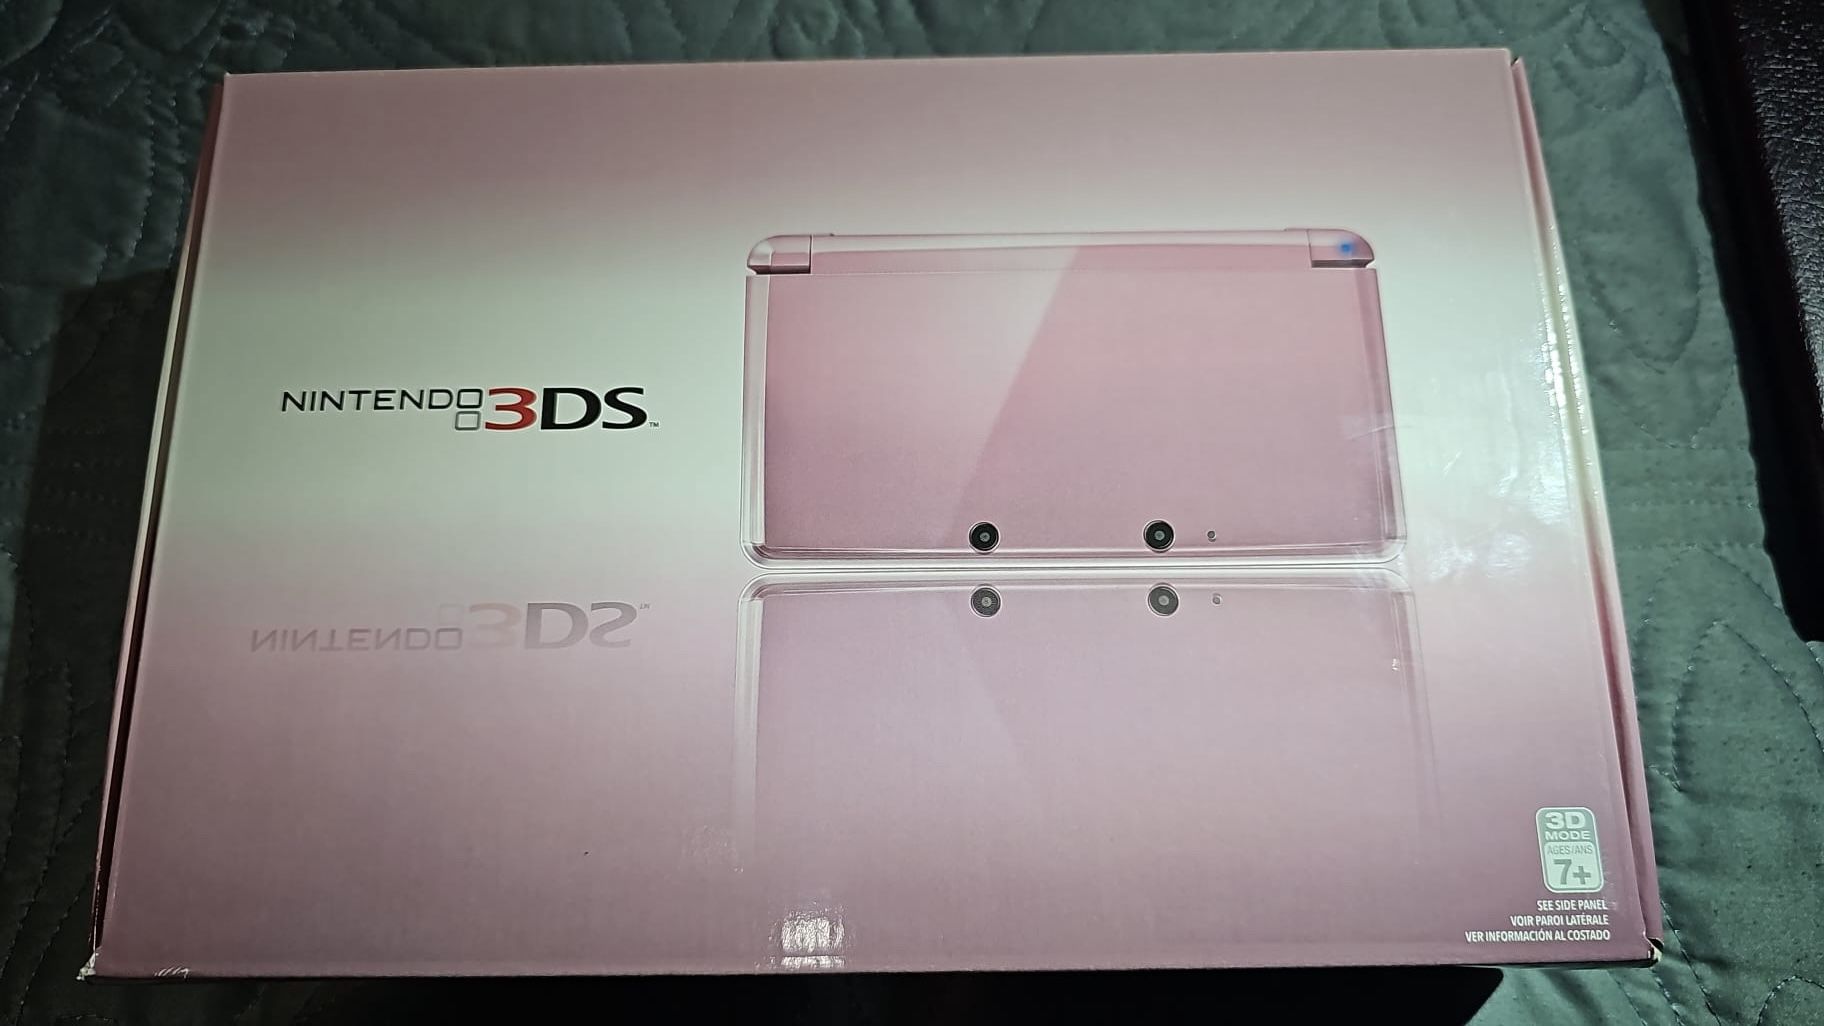 Brand New! 3Ds Pearl Pink 